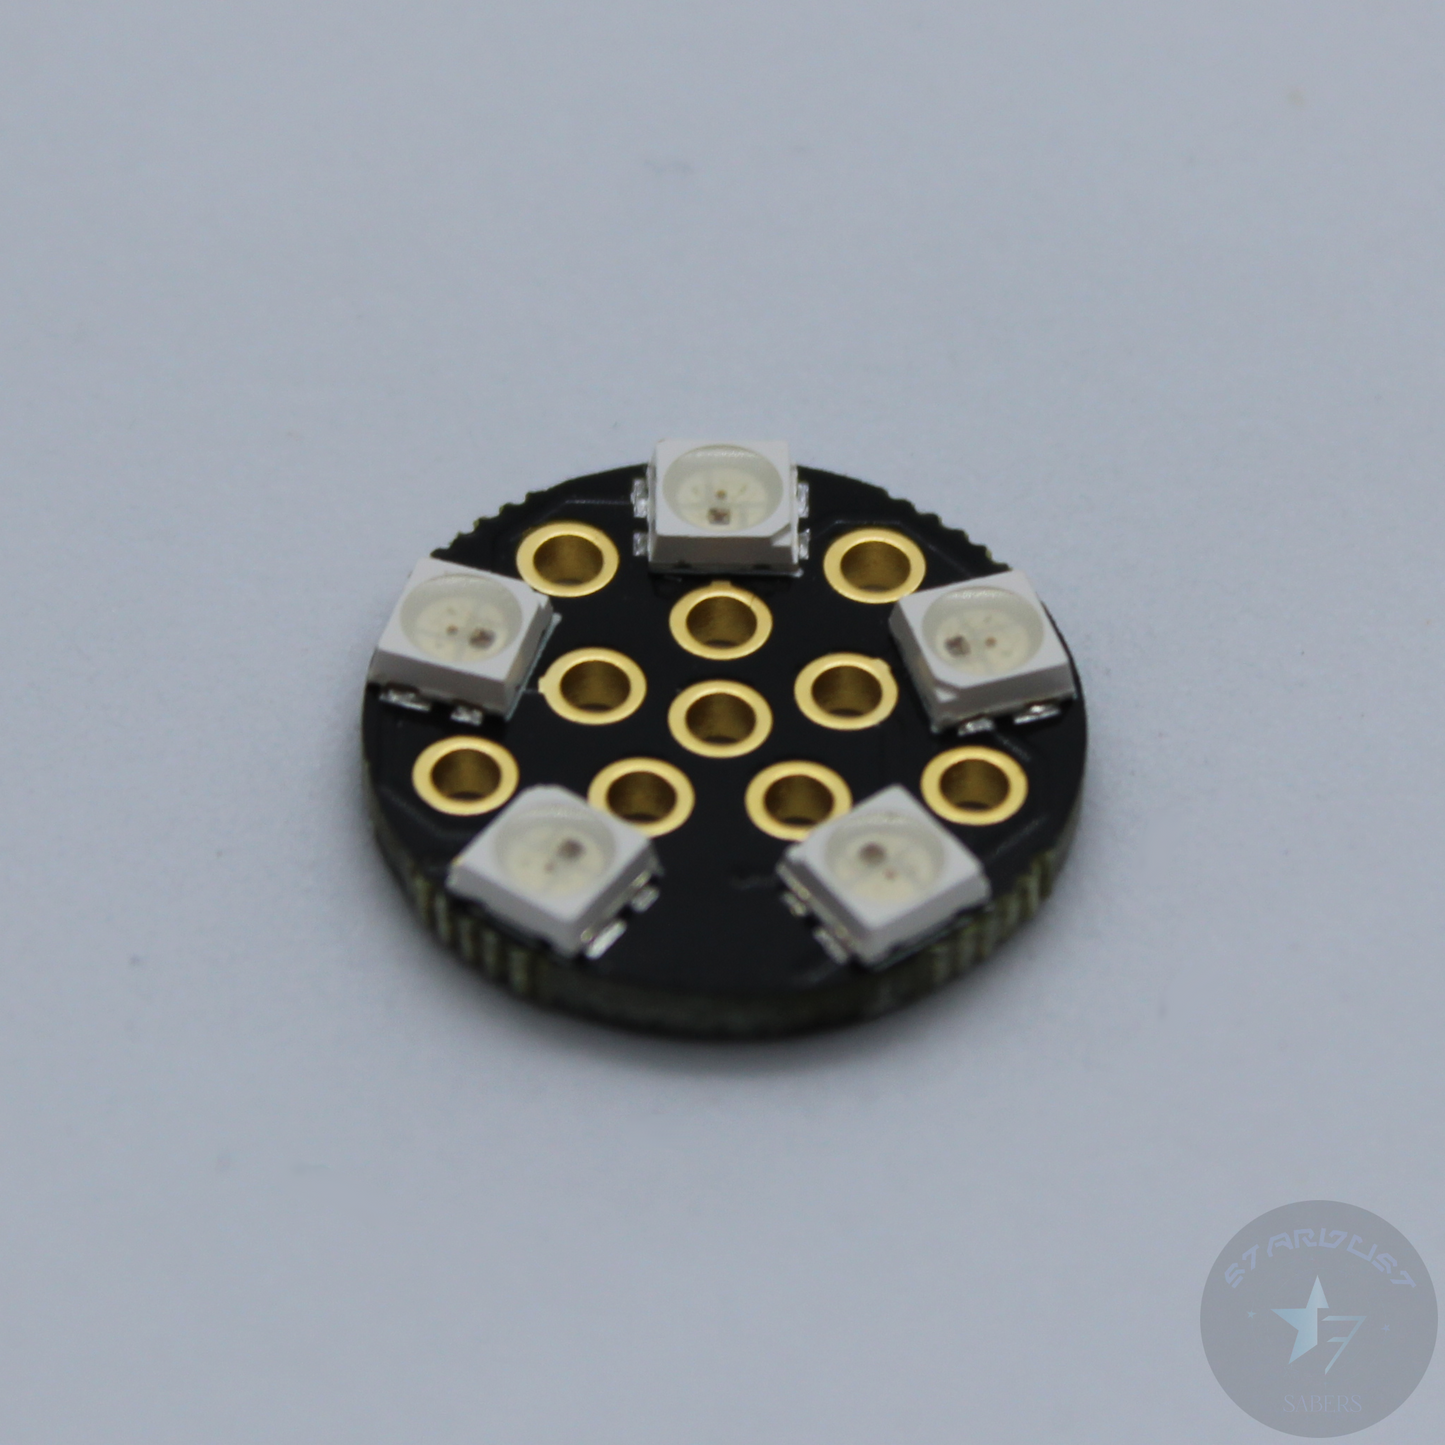 SDS ECO Pixel Emitter Connector (ECO PxE)